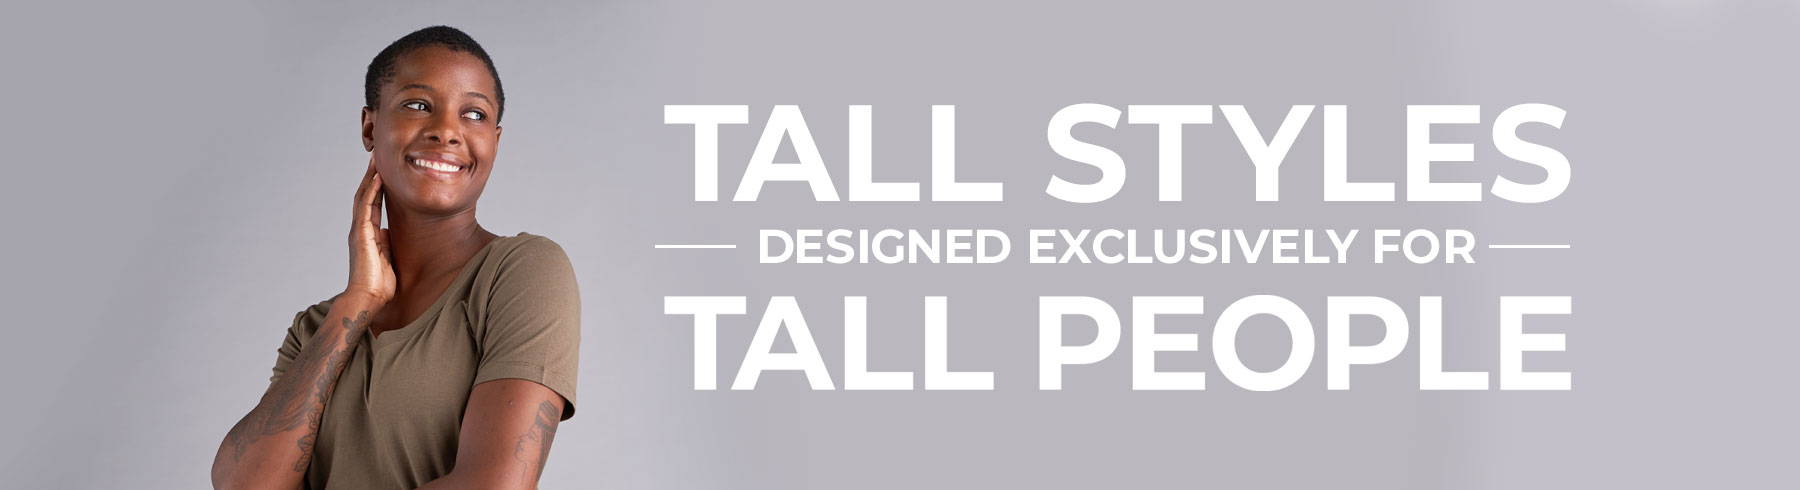 tall-styles-designed-exclusively-for-tall-people